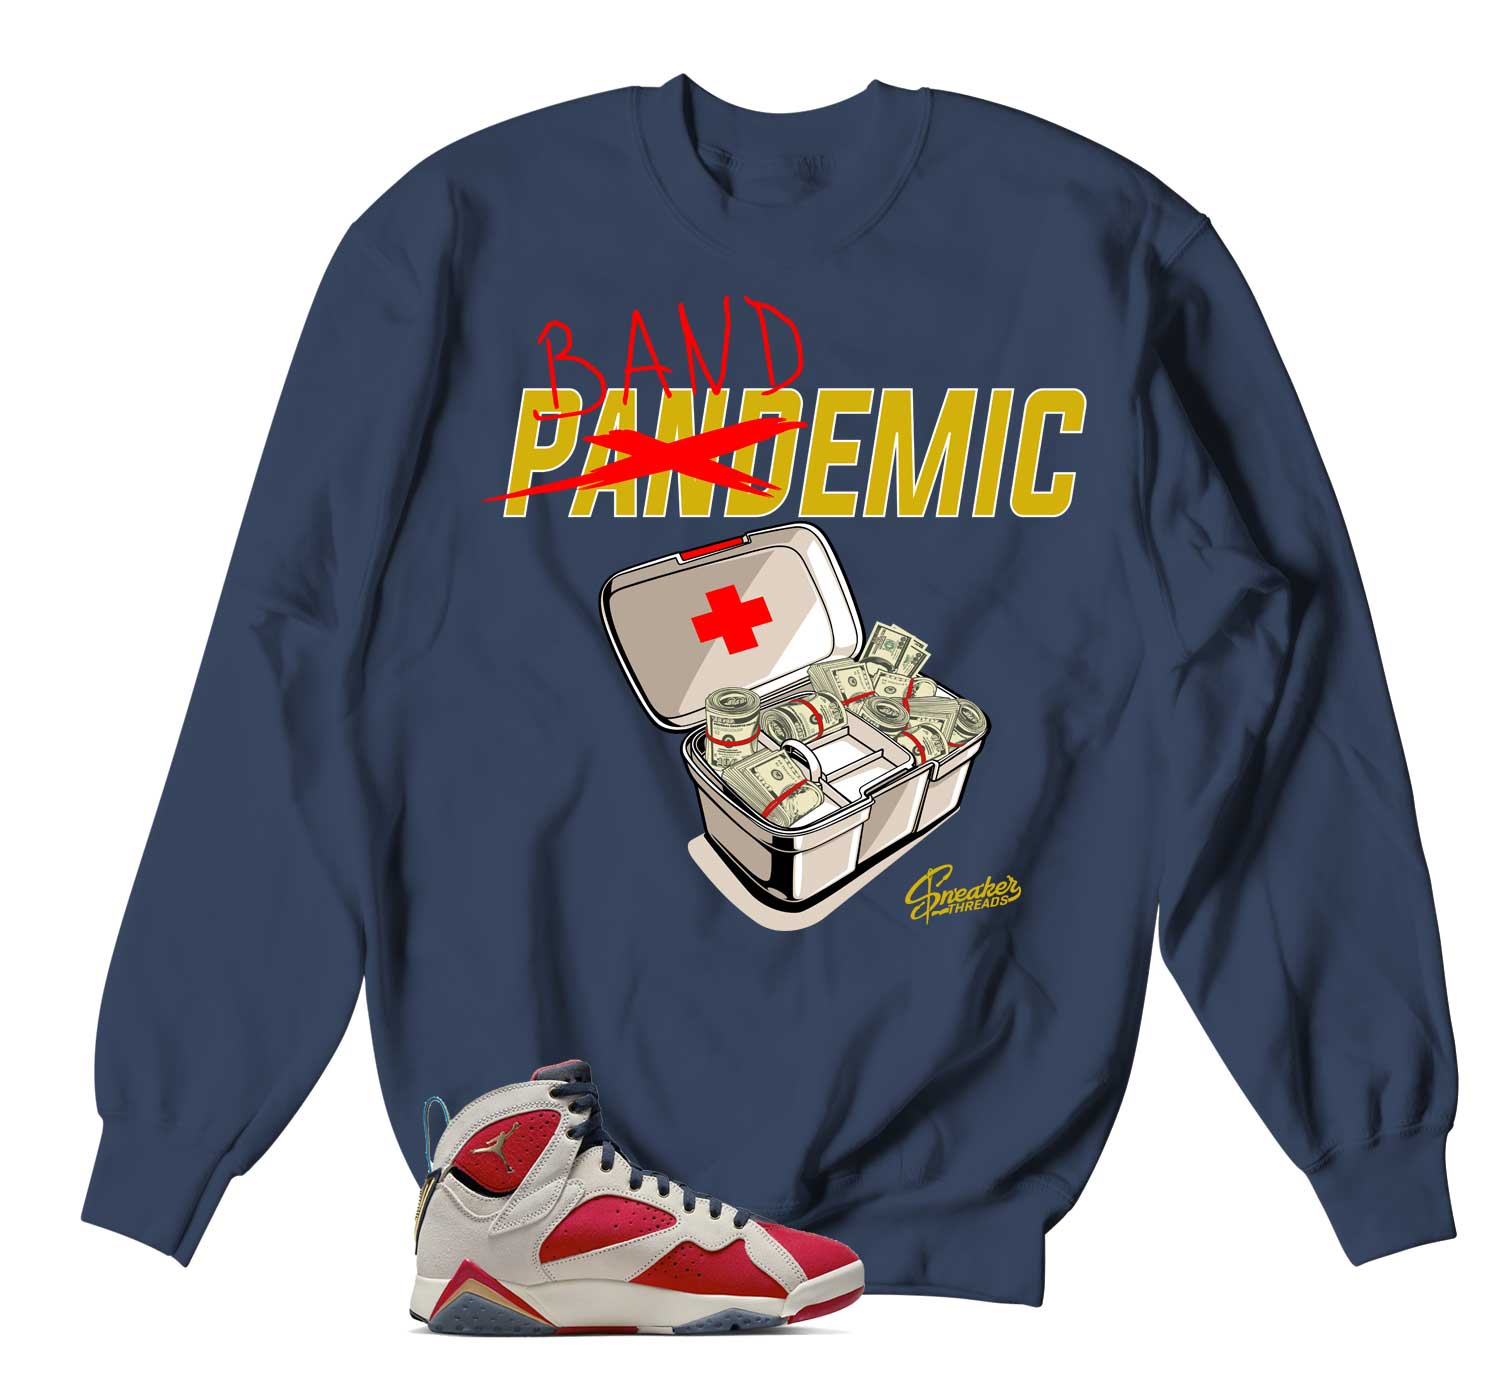 Retro 7 New Sheriff in Town Sweater - Bandemic - Navy